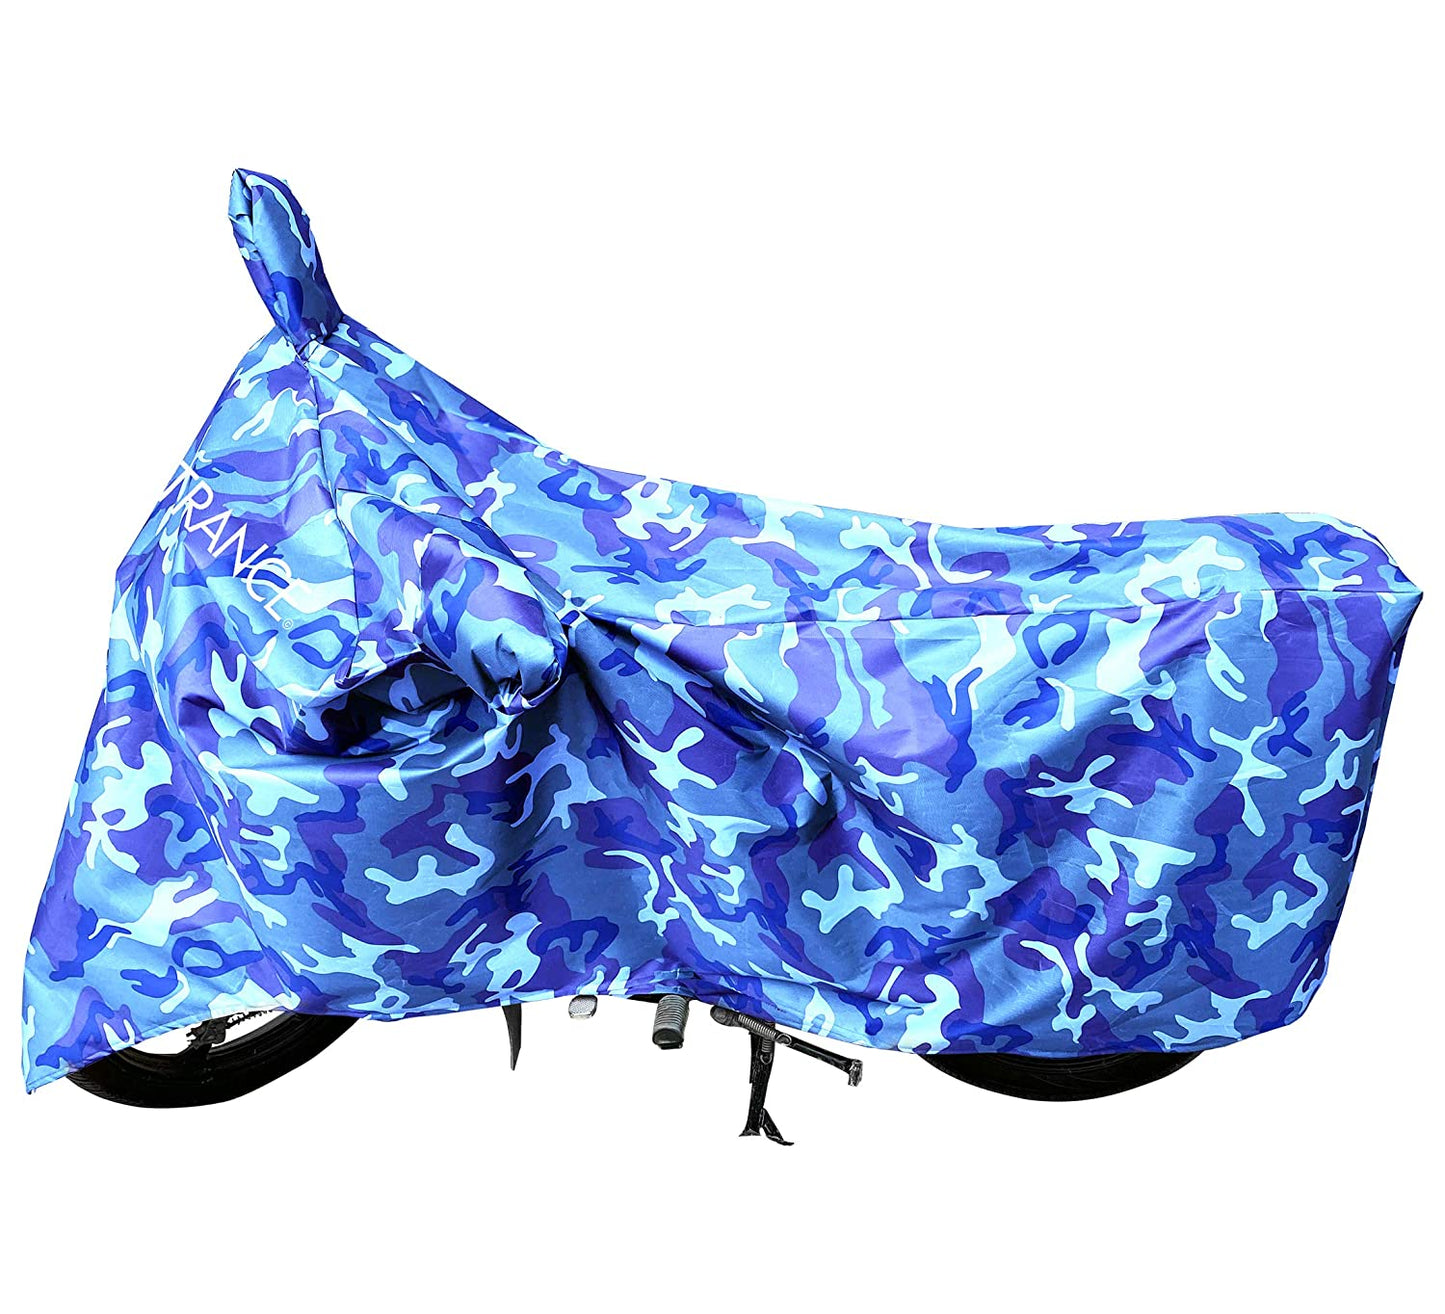 MotoTrance Jungle Bike Body Covers For Suzuki GSX R1000 - Interlock-Stitched Waterproof and Heat Resistant with Mirror Pockets